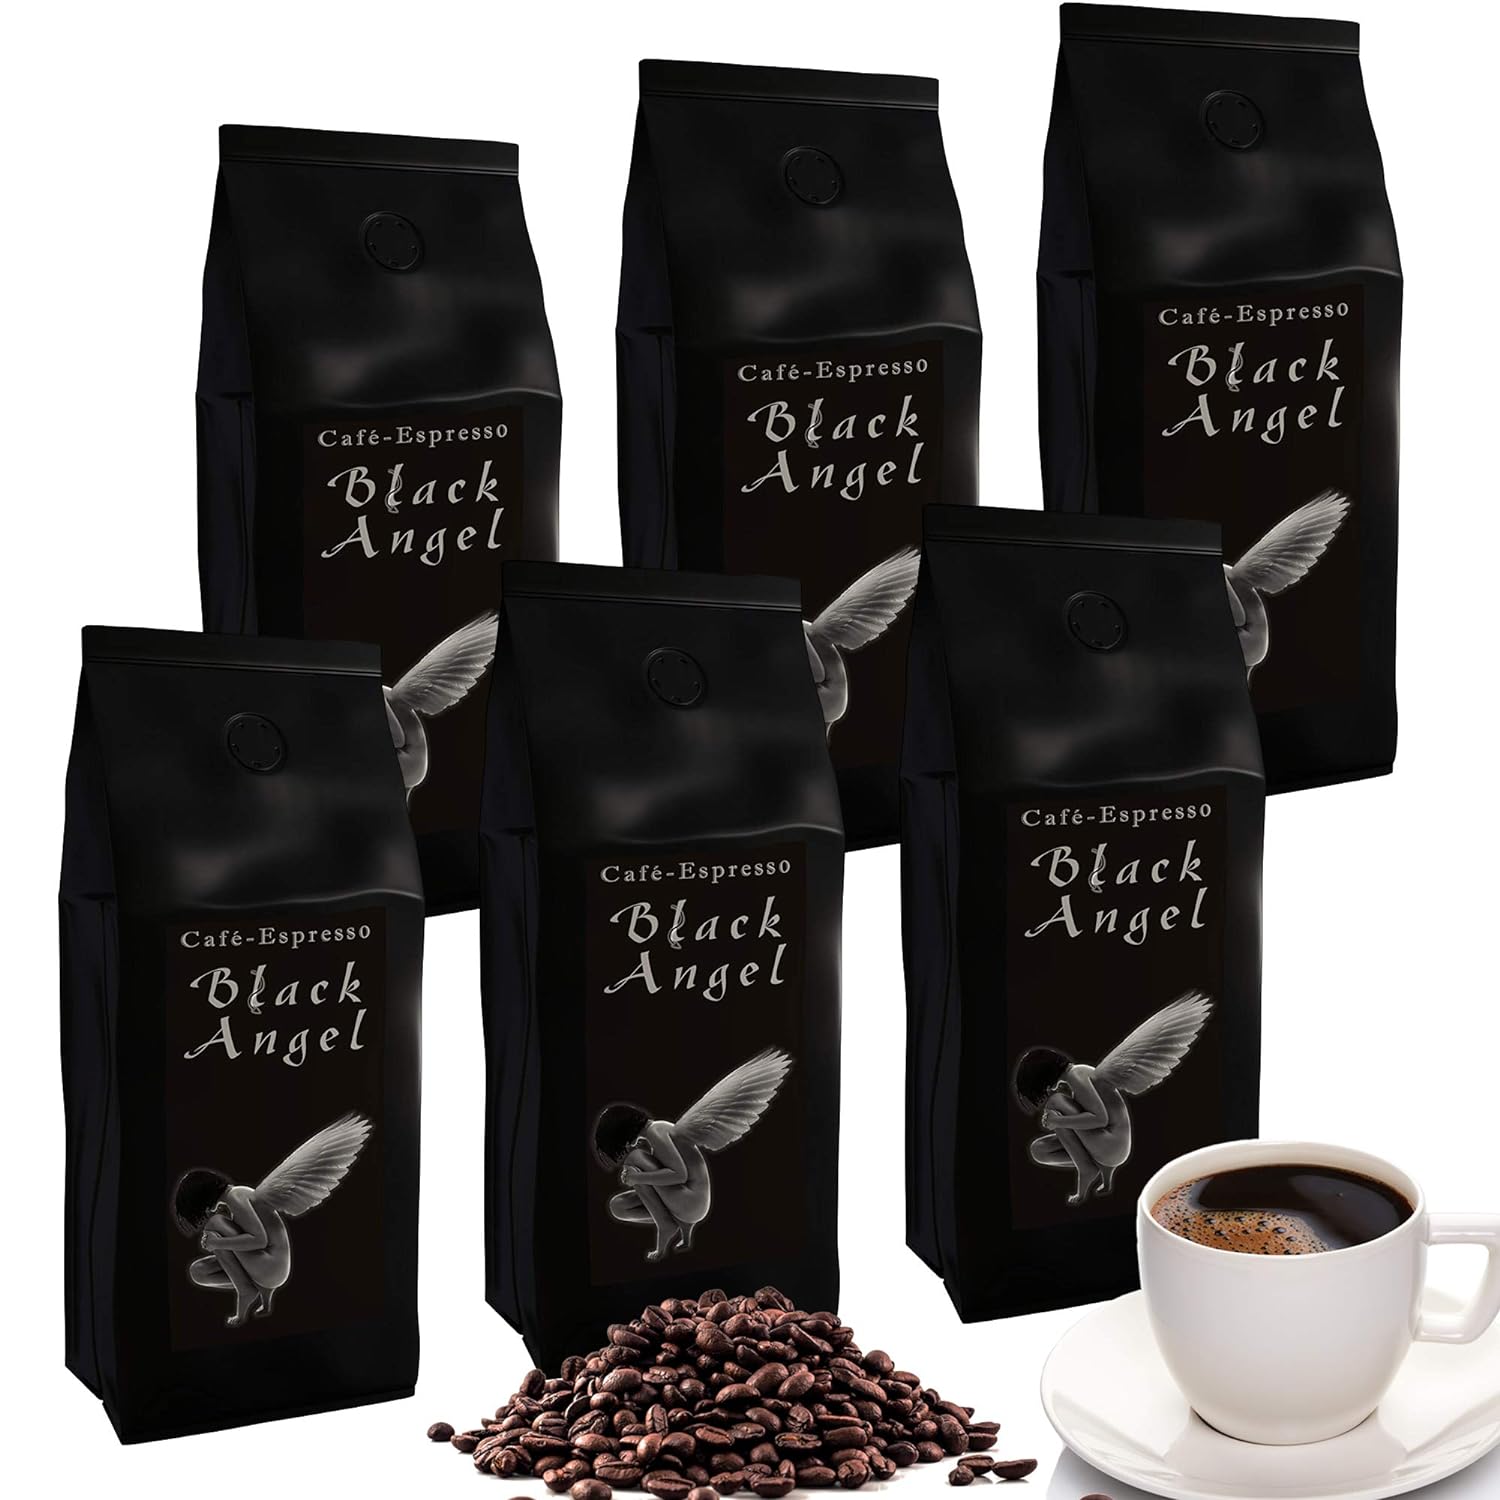 Espresso Coffee Beans / Cafe Black Angel 6 x 1000 g Gastro Pack for Fully Automatic Machines